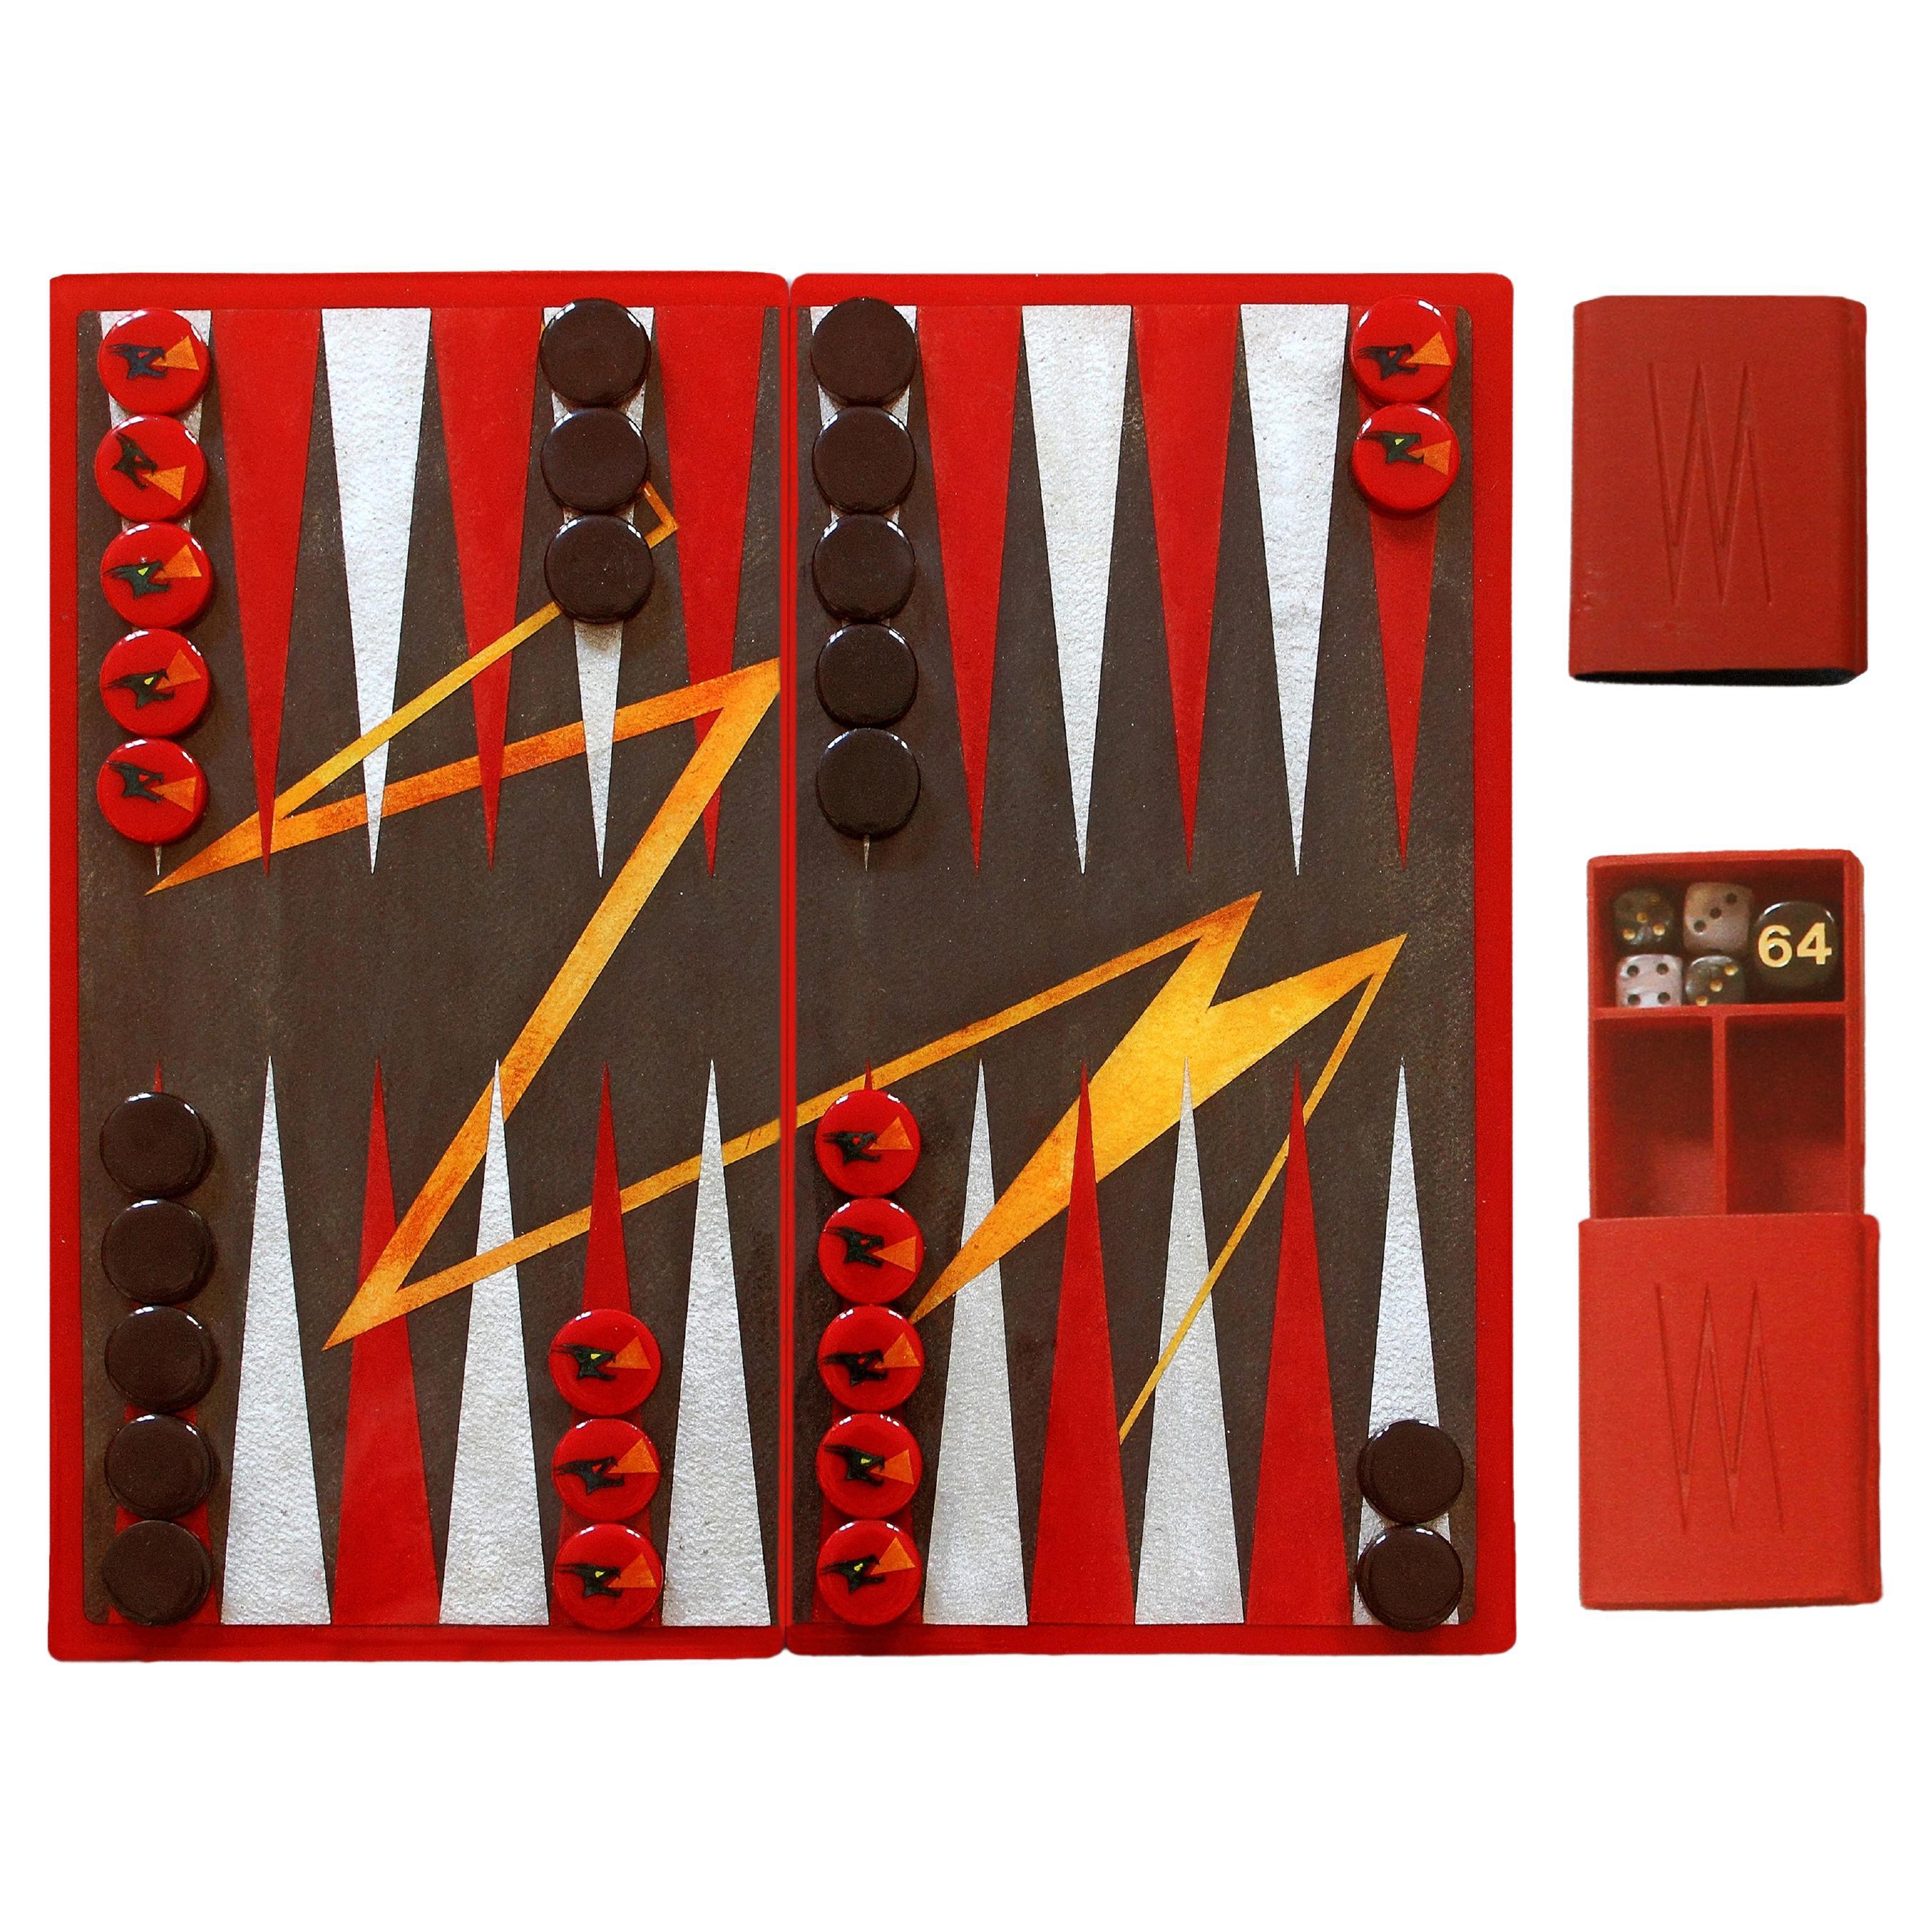 Modern Backgammon Travel Game Handmade Epoxy Resin Handpainted Limited Edition For Sale